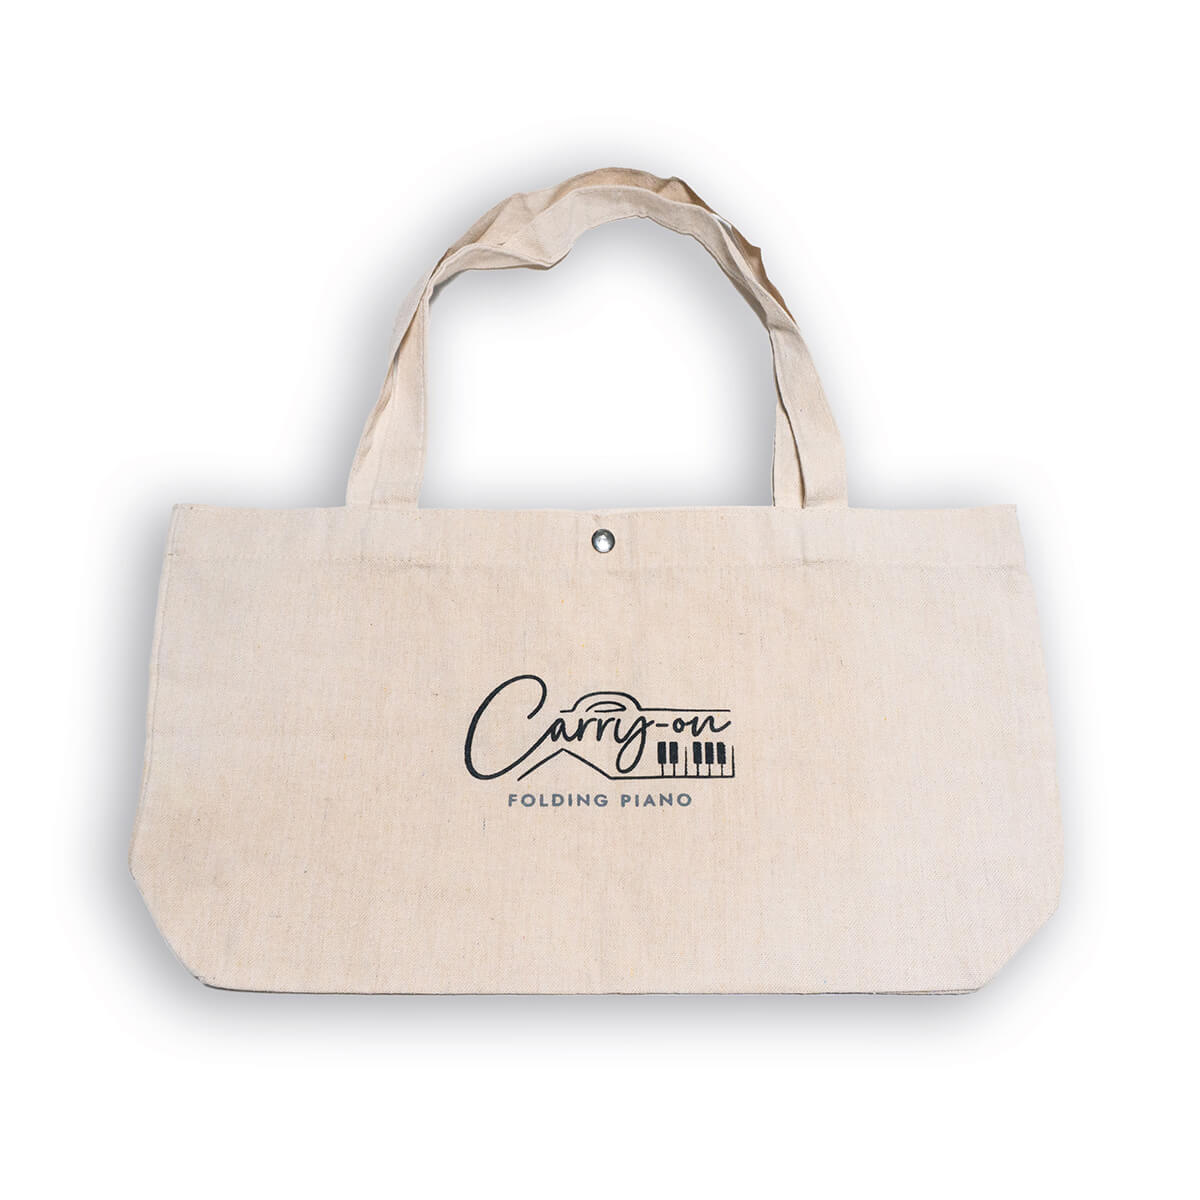 49th Parallel Cotton Tote Bag